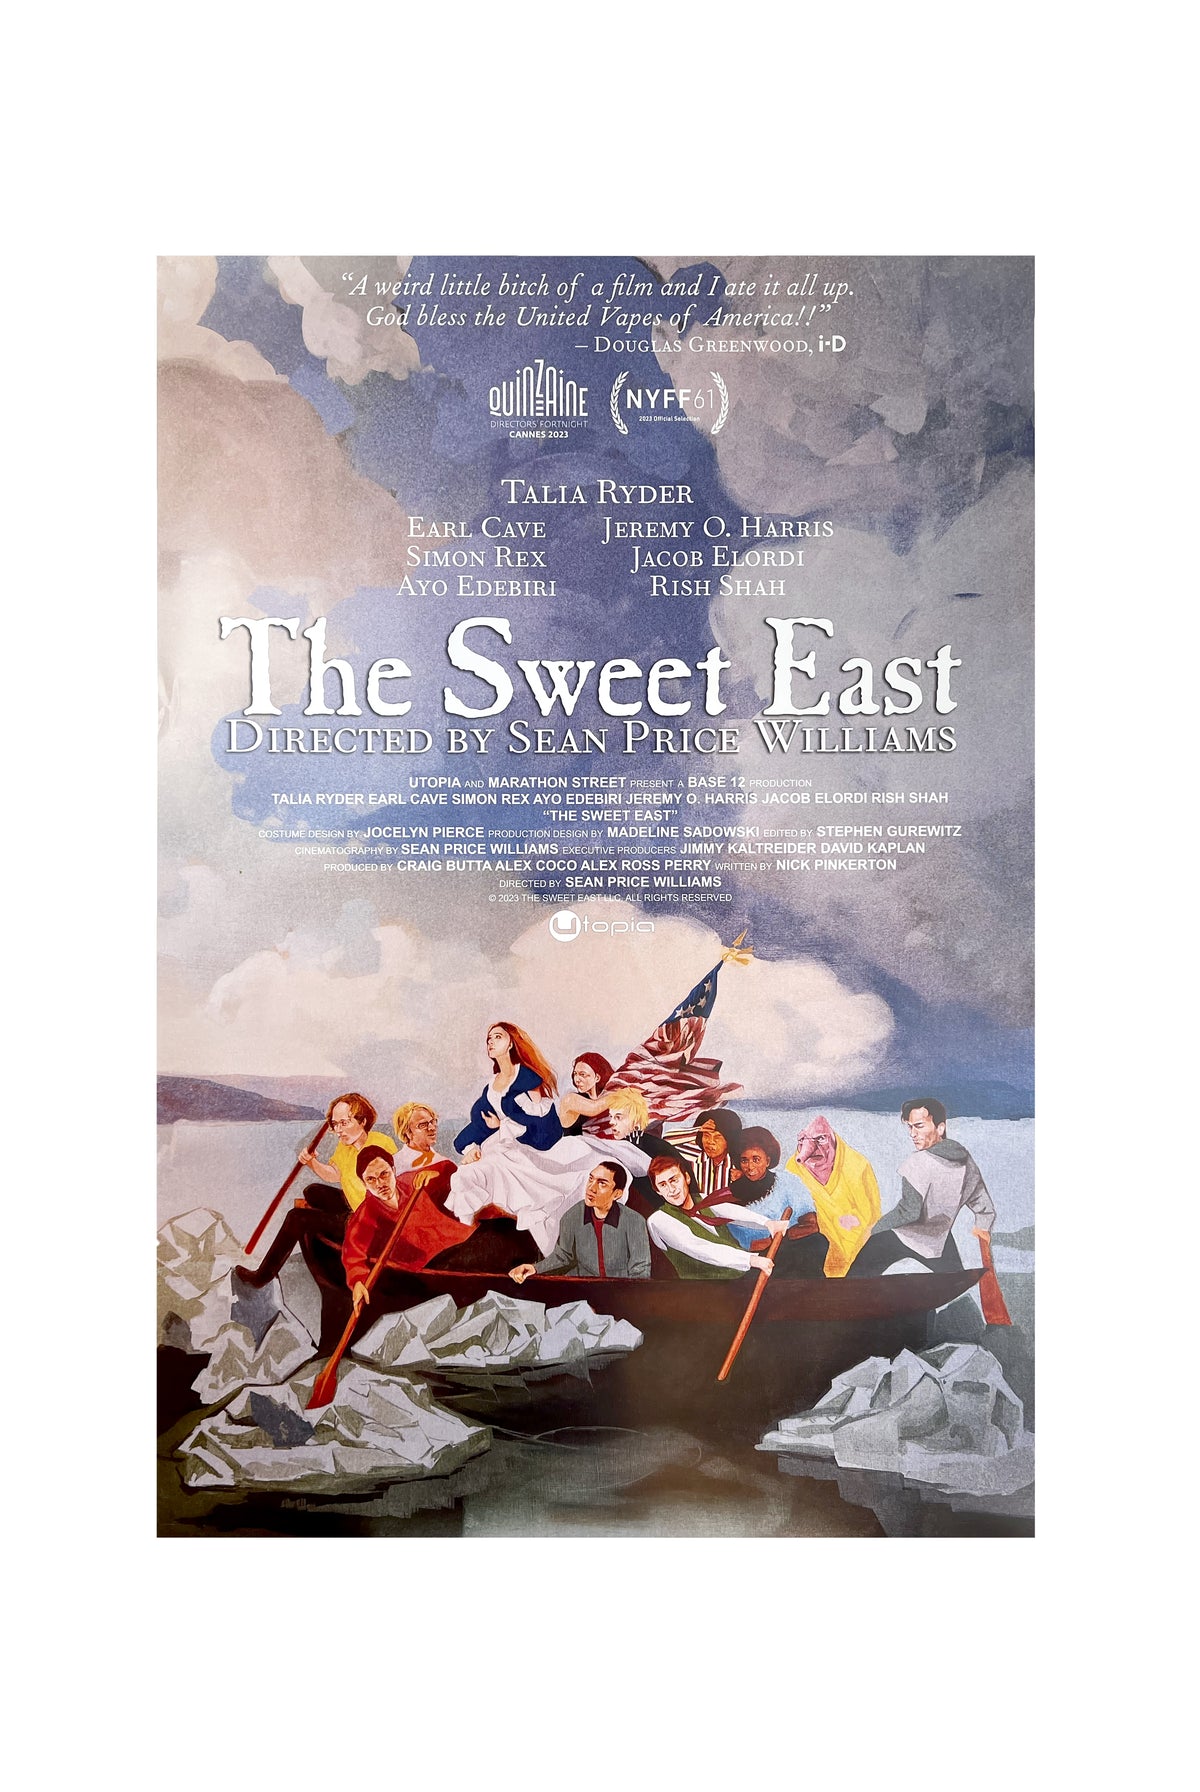 The Sweet East (Official Theatrical Poster)